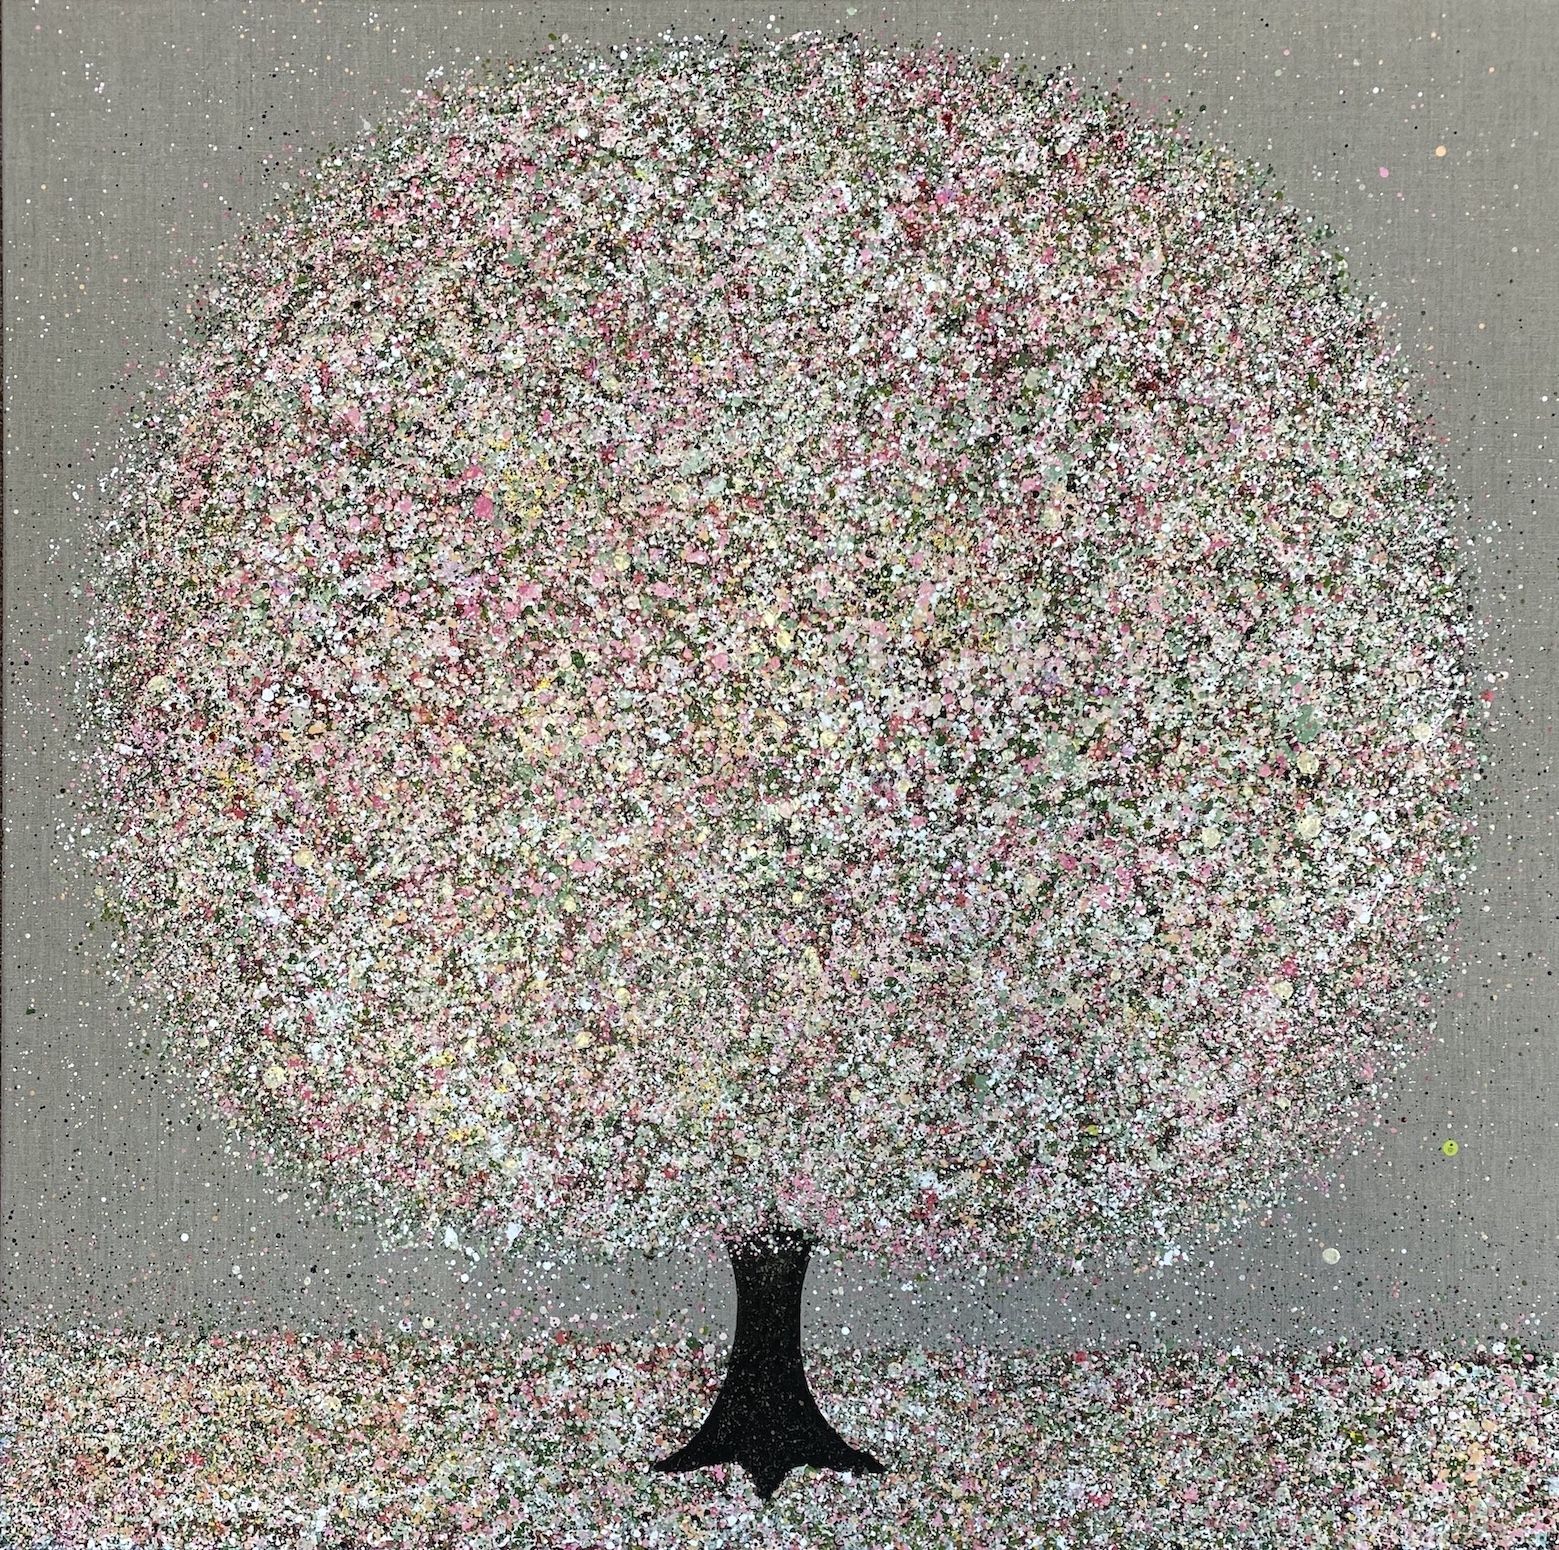 A Tree for Daydreams by Nicky Chubb